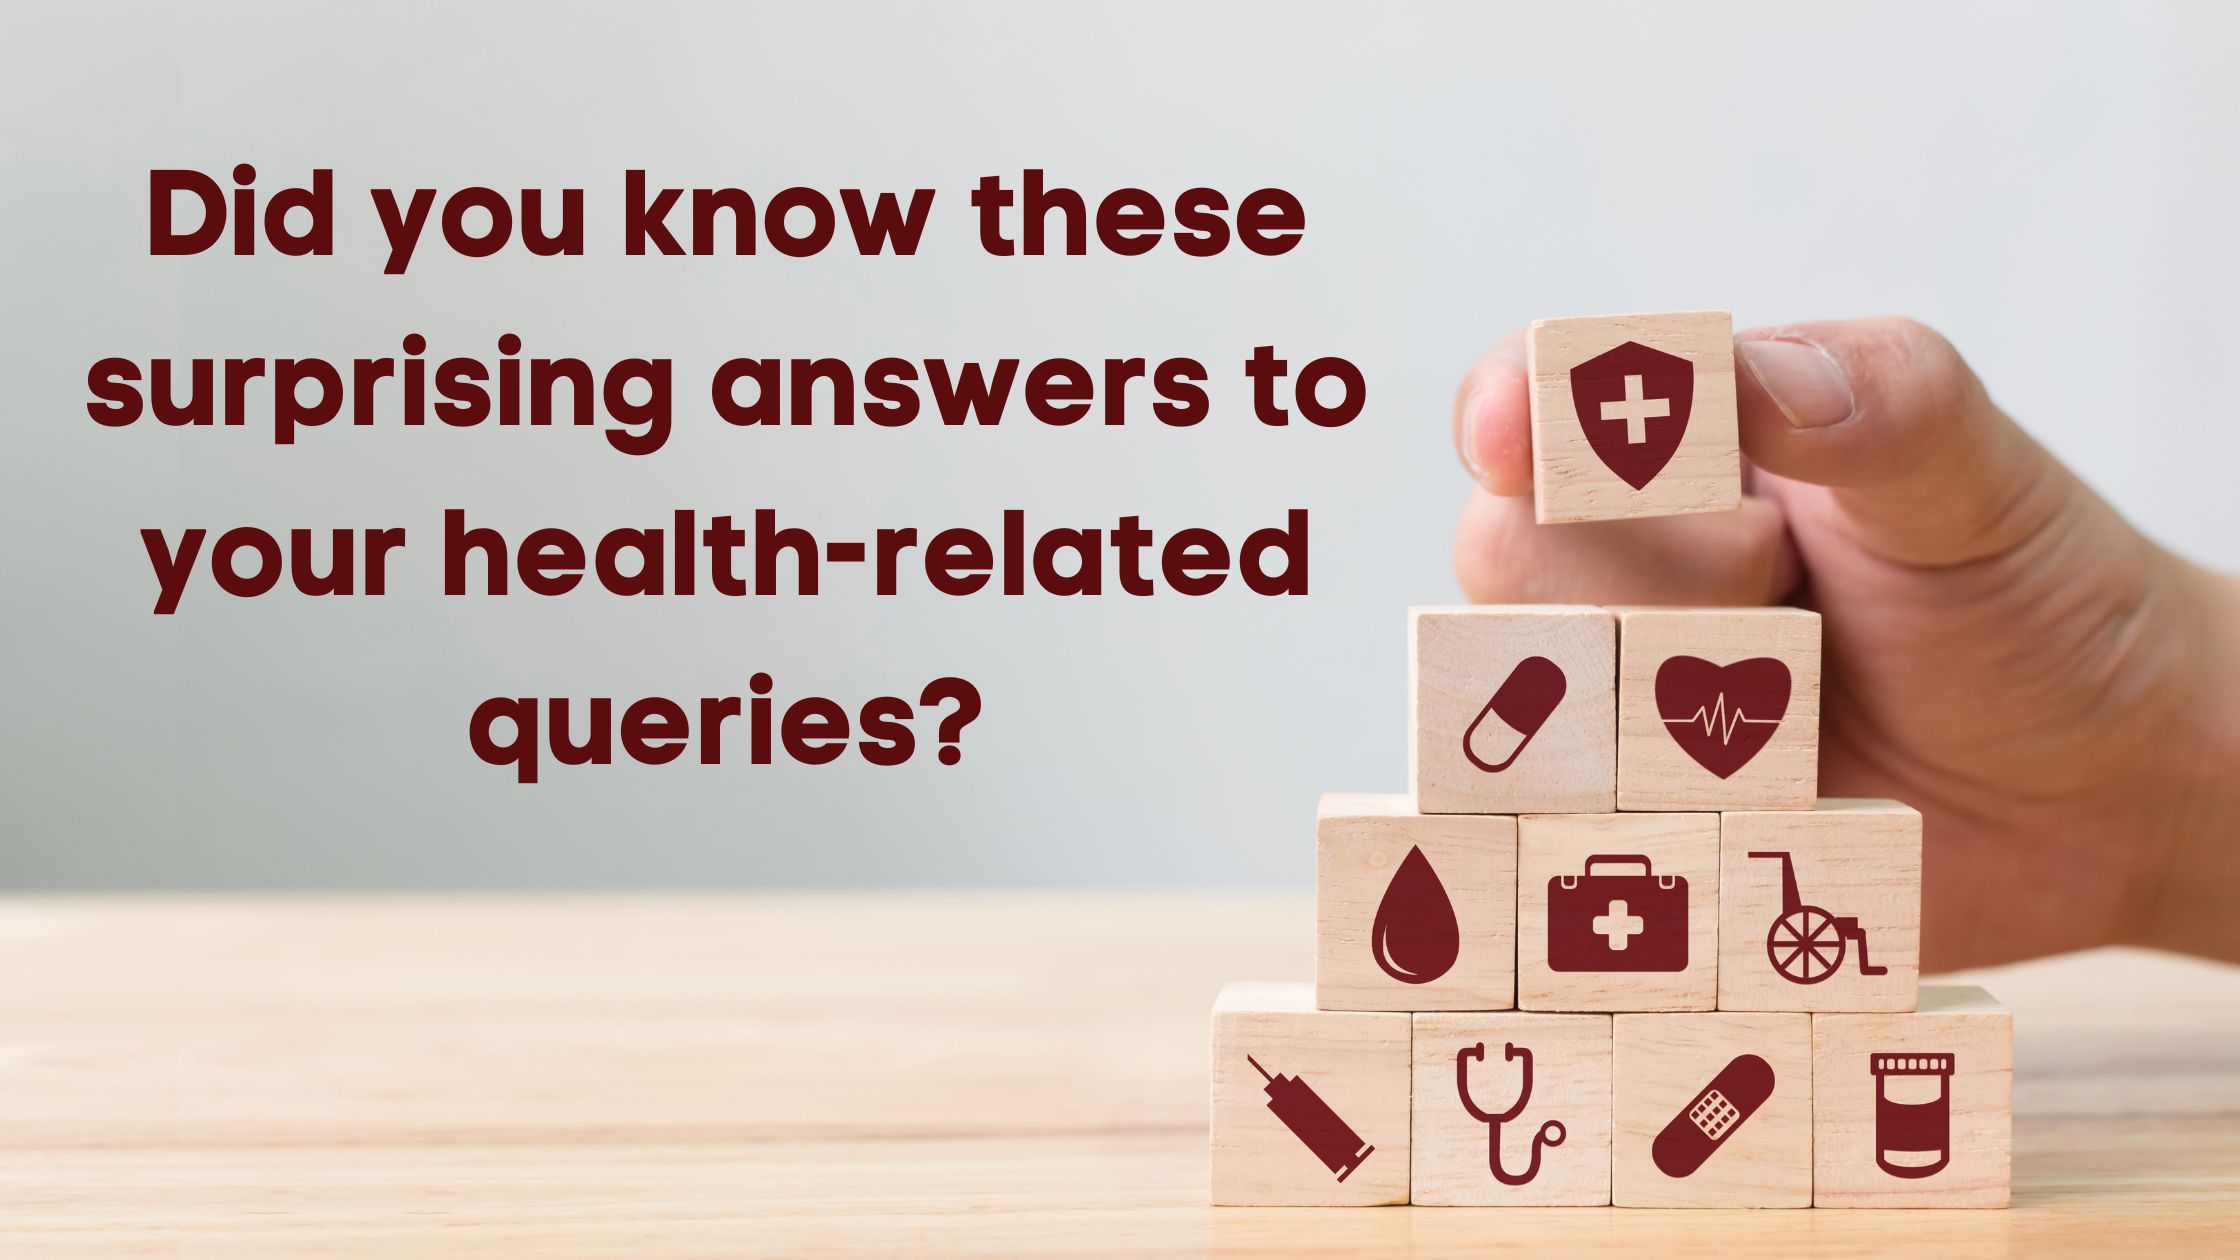 Did you know these surprising answers to your health-related queries?